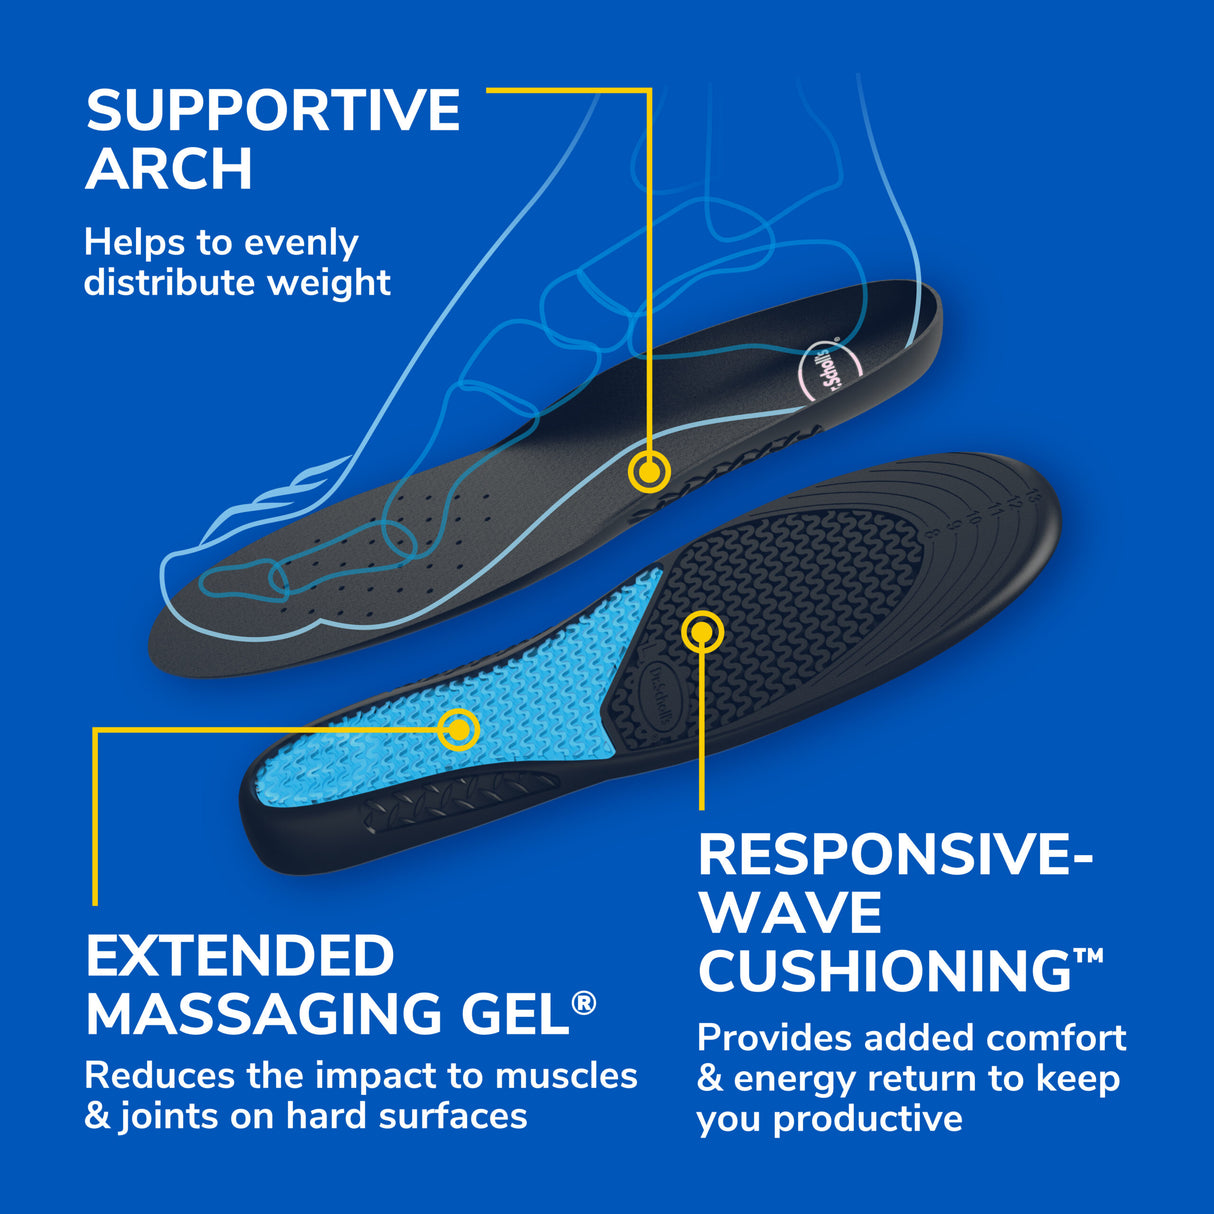 image of supportive arch extended massaging gel and responsive wave cushioning